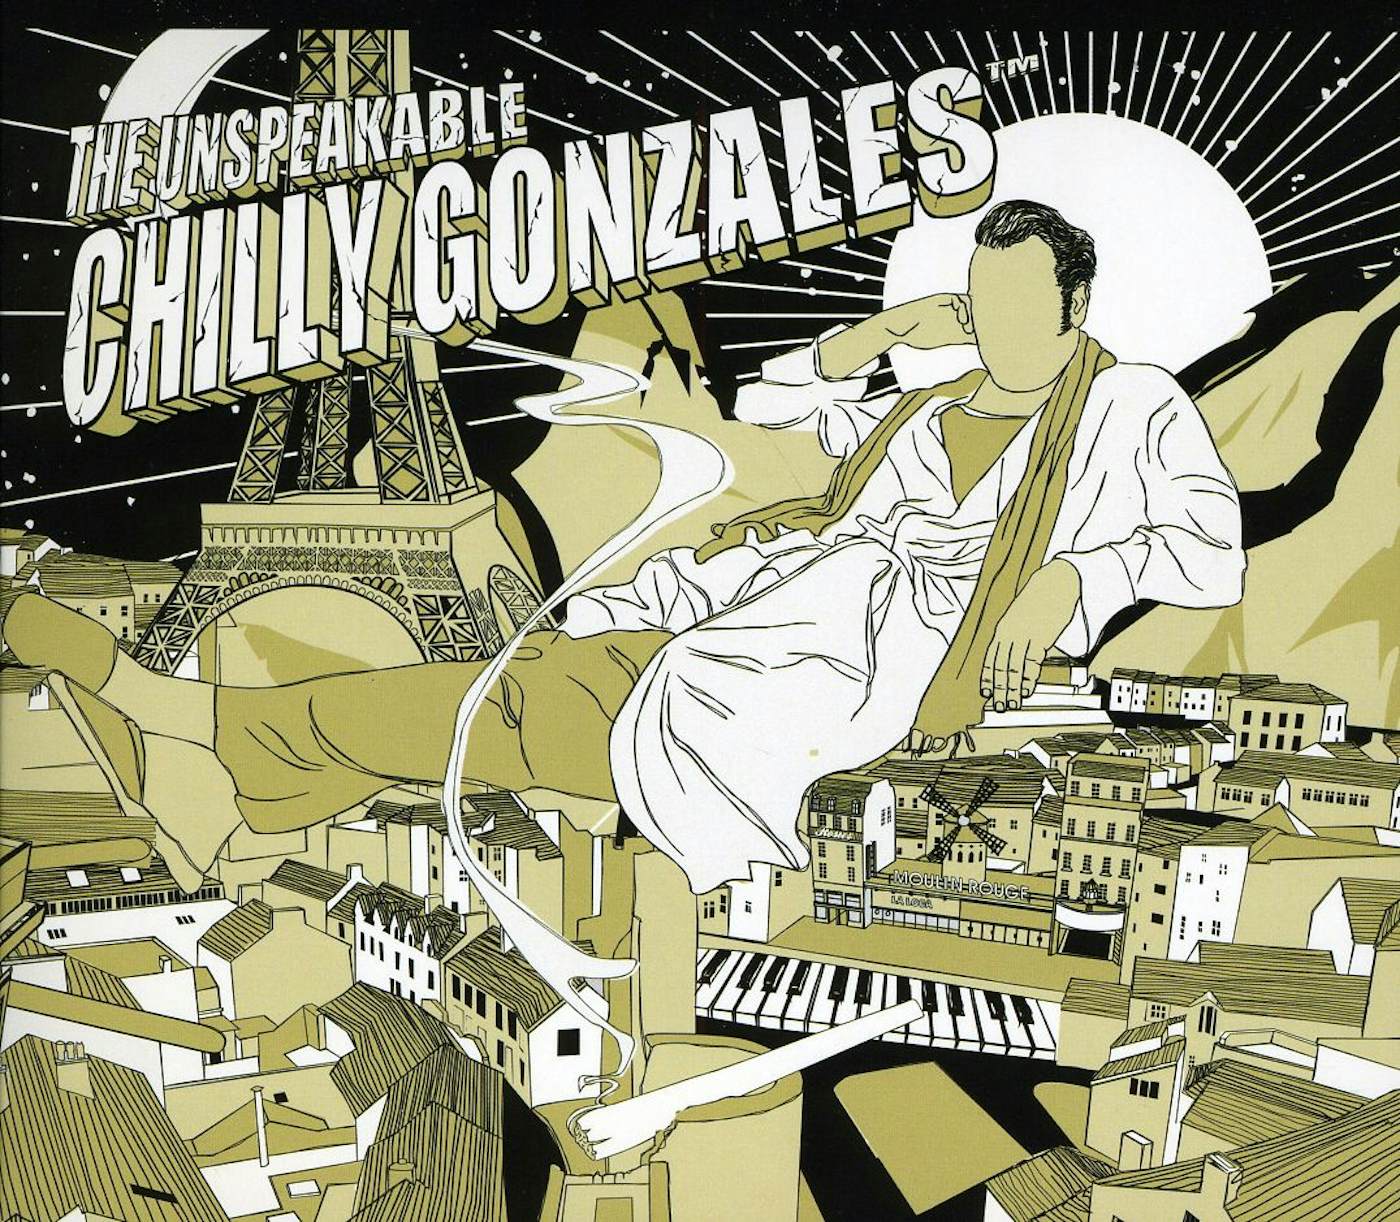 Chilly Gonzales Solo Piano III Vinyl Record